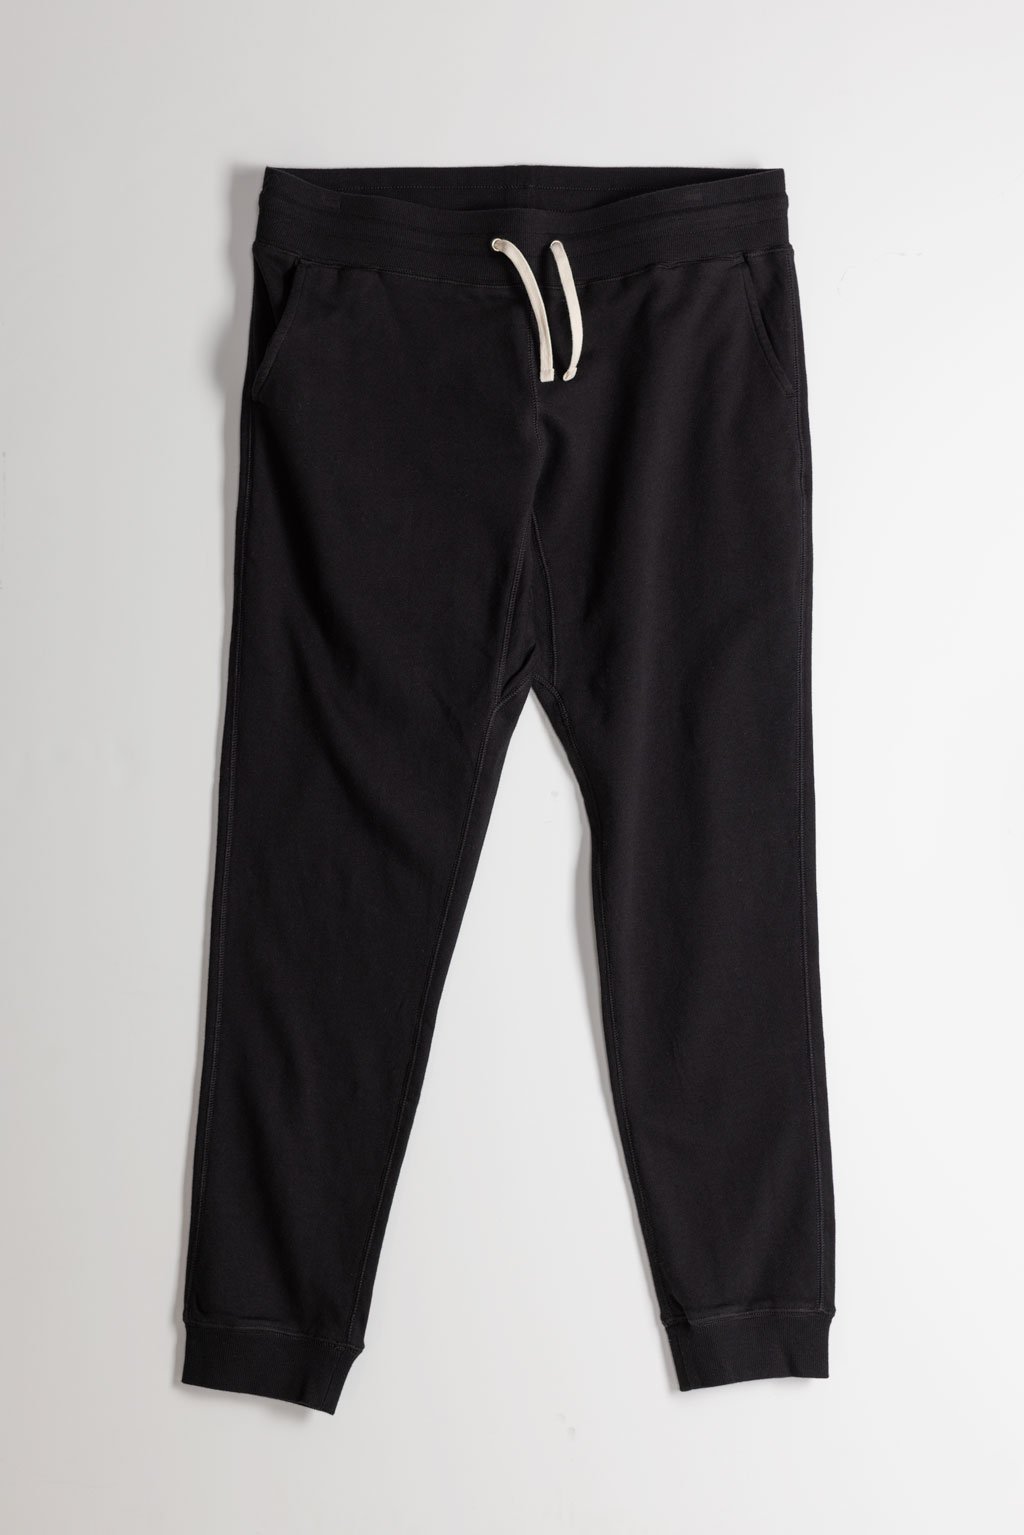 NS2167-1 250g French Terry Sweatpants in Black 01